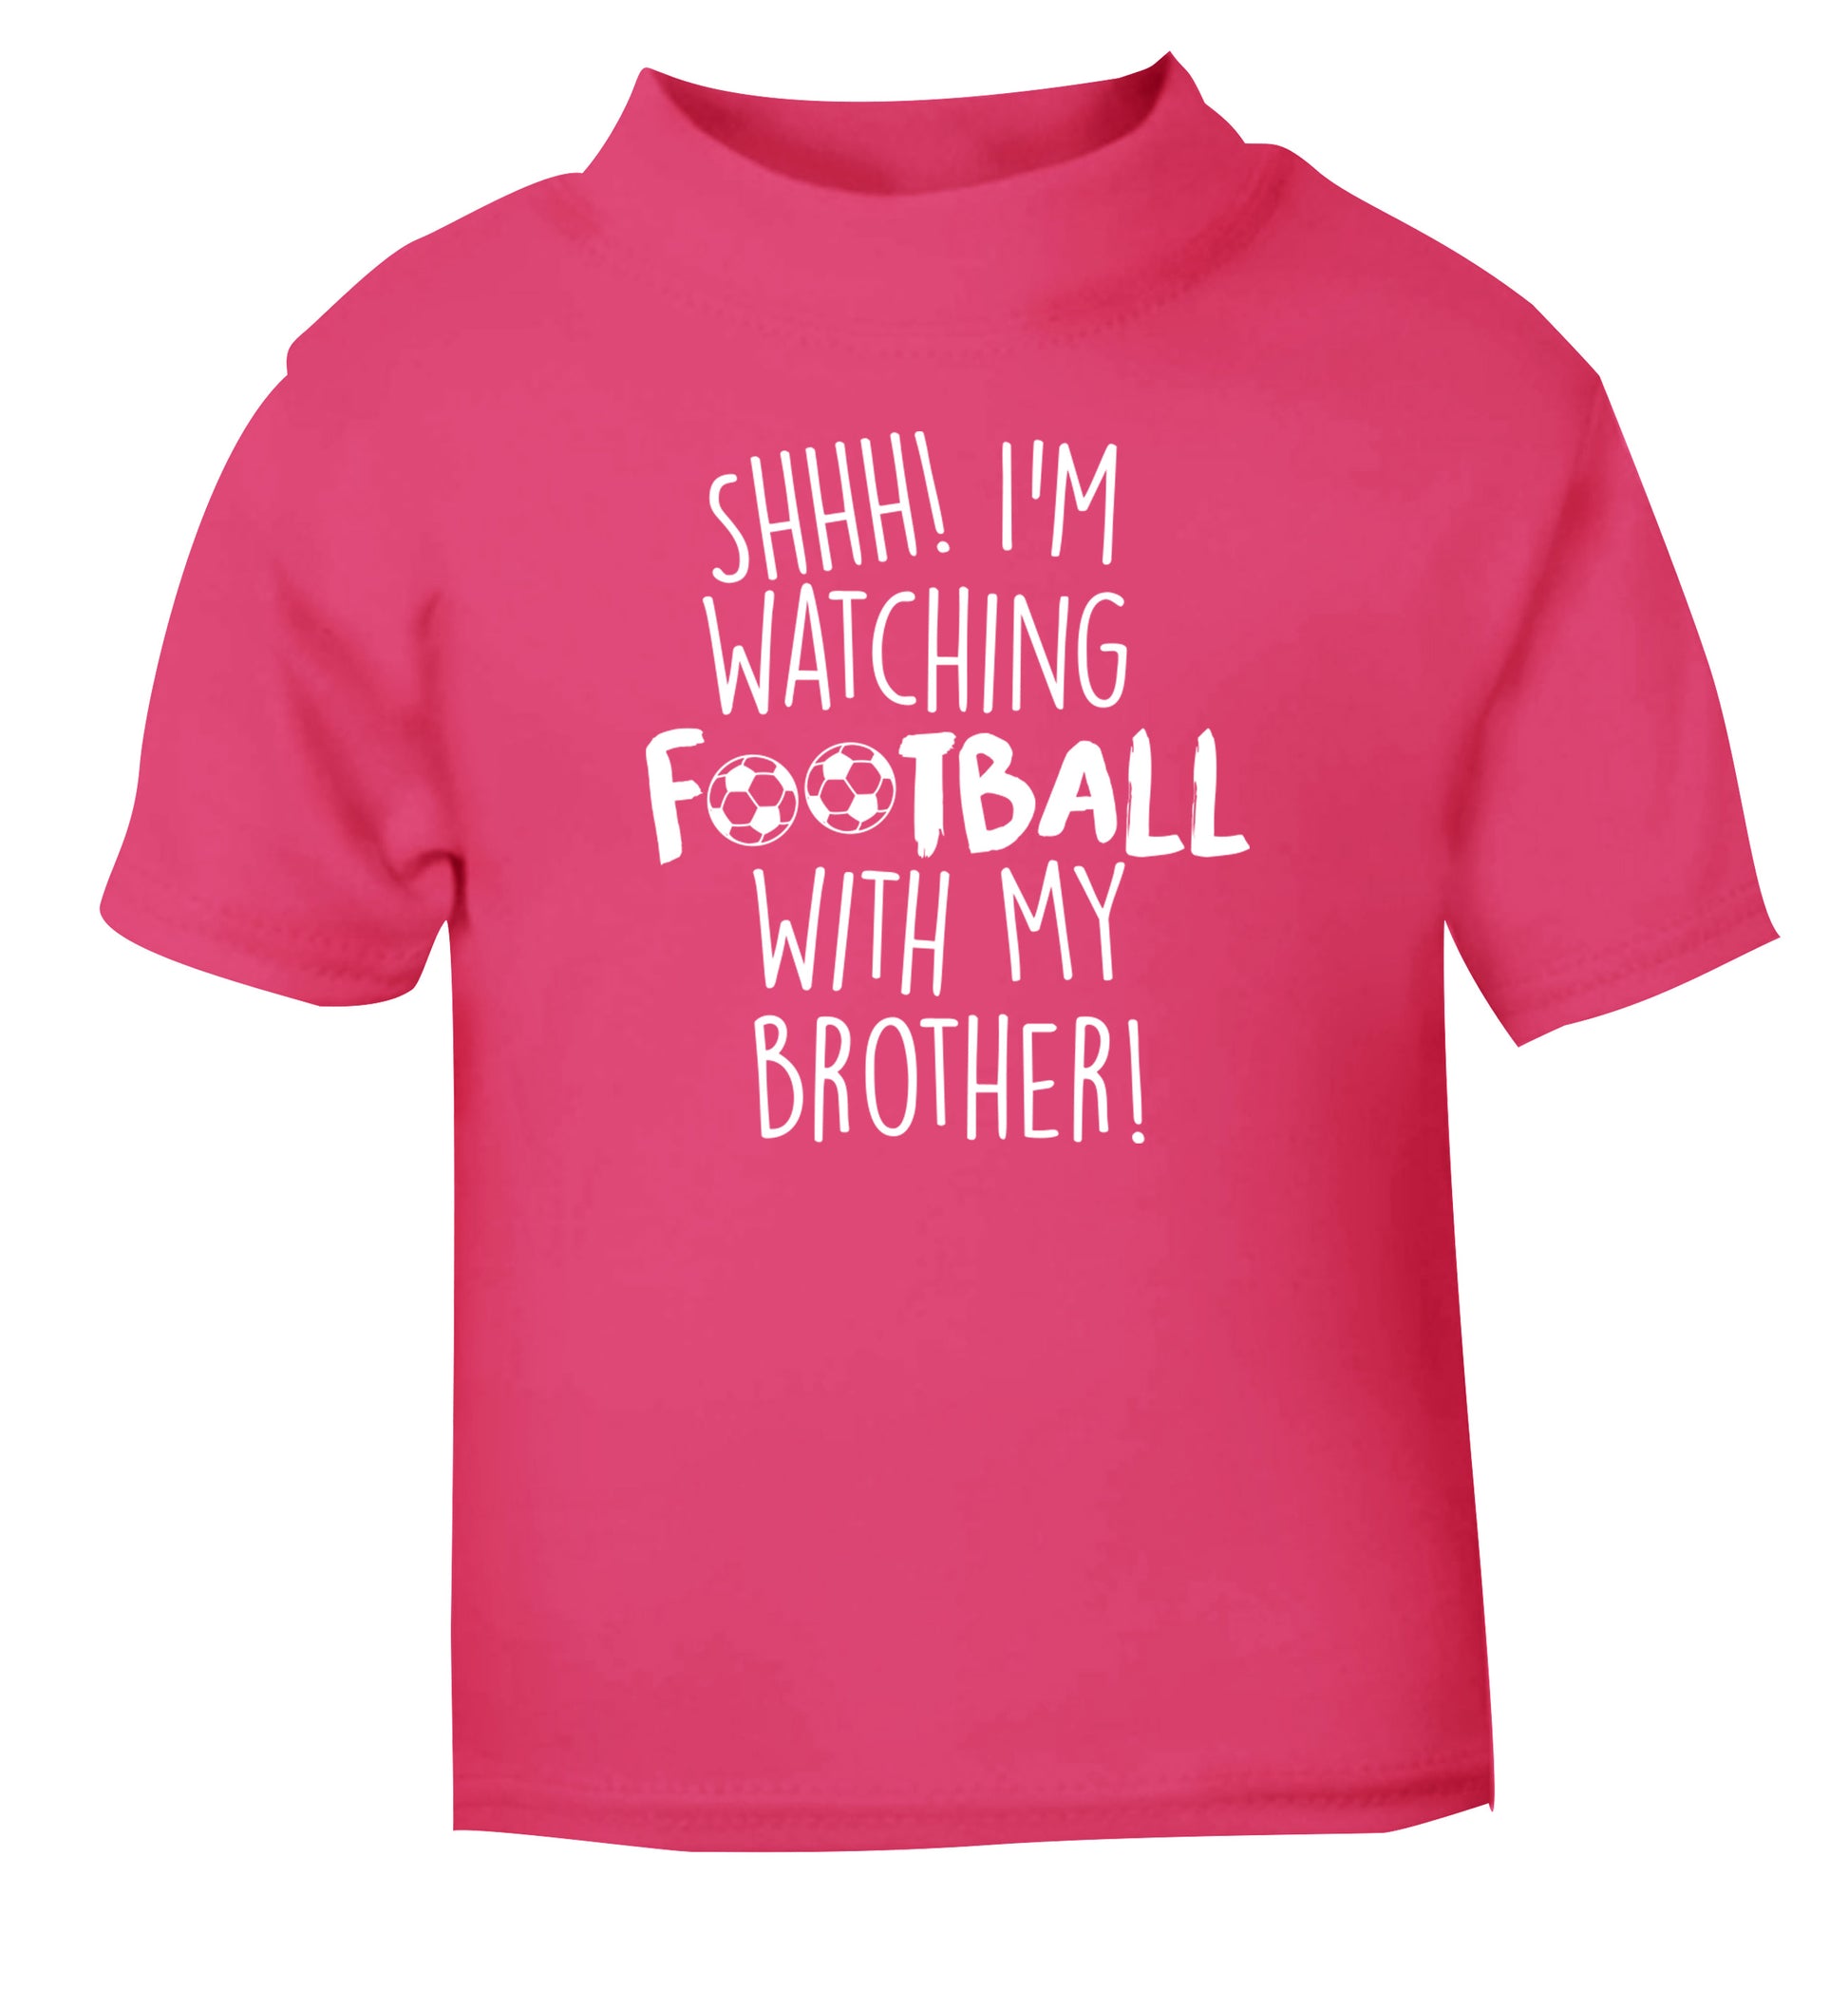 Shhh I'm watching football with my brother pink Baby Toddler Tshirt 2 Years